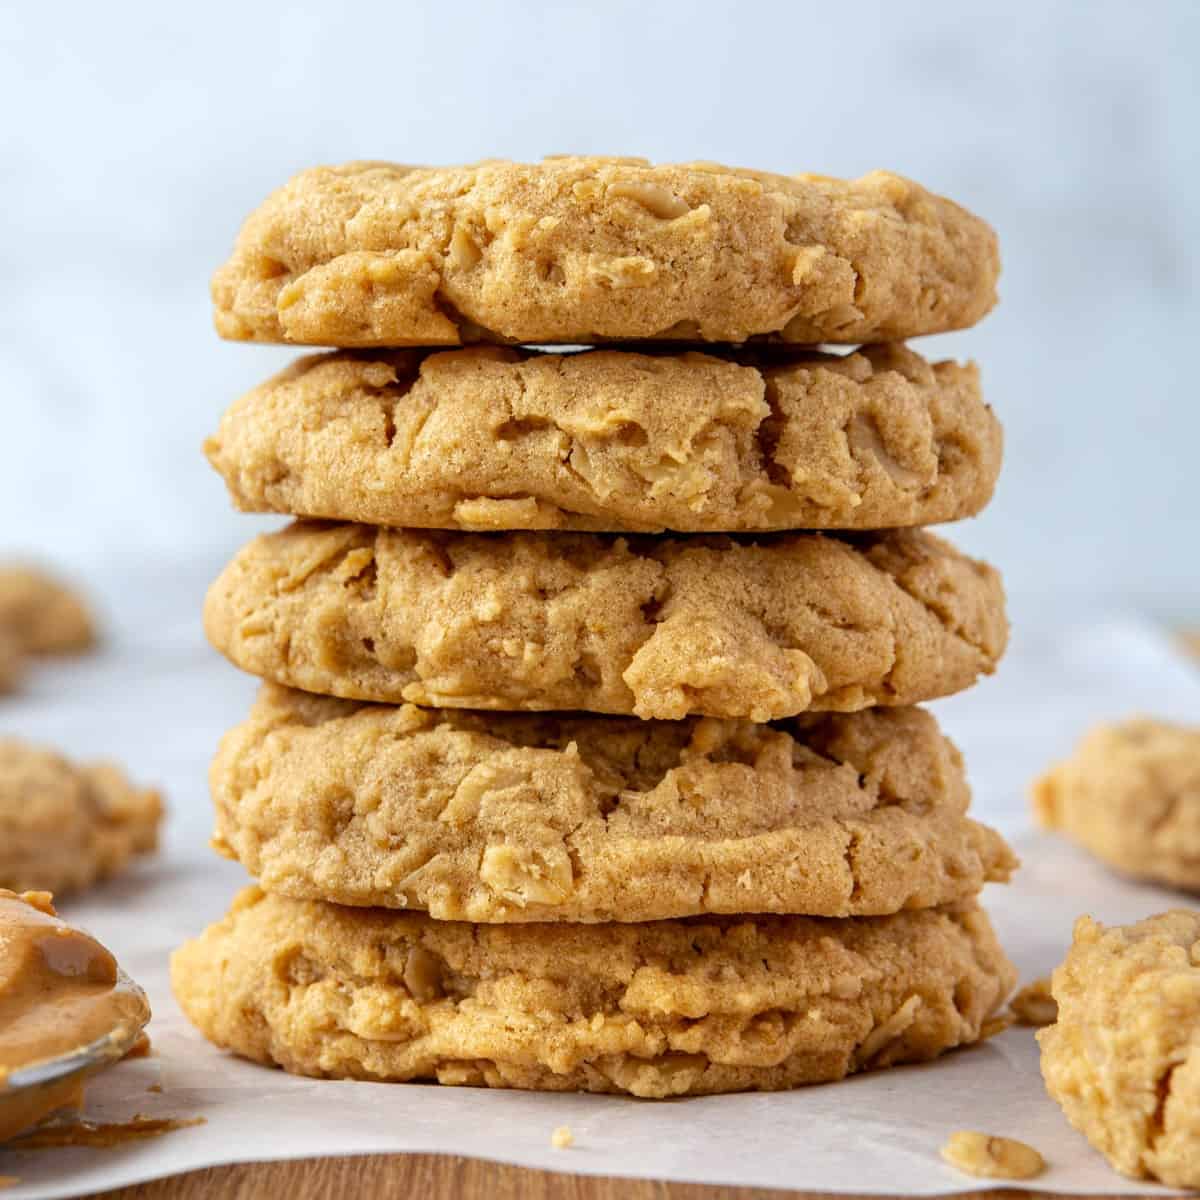 Peanut butter oatmeal cookies on parchment paper with a small jar of peanut butter and a spoon nearby.